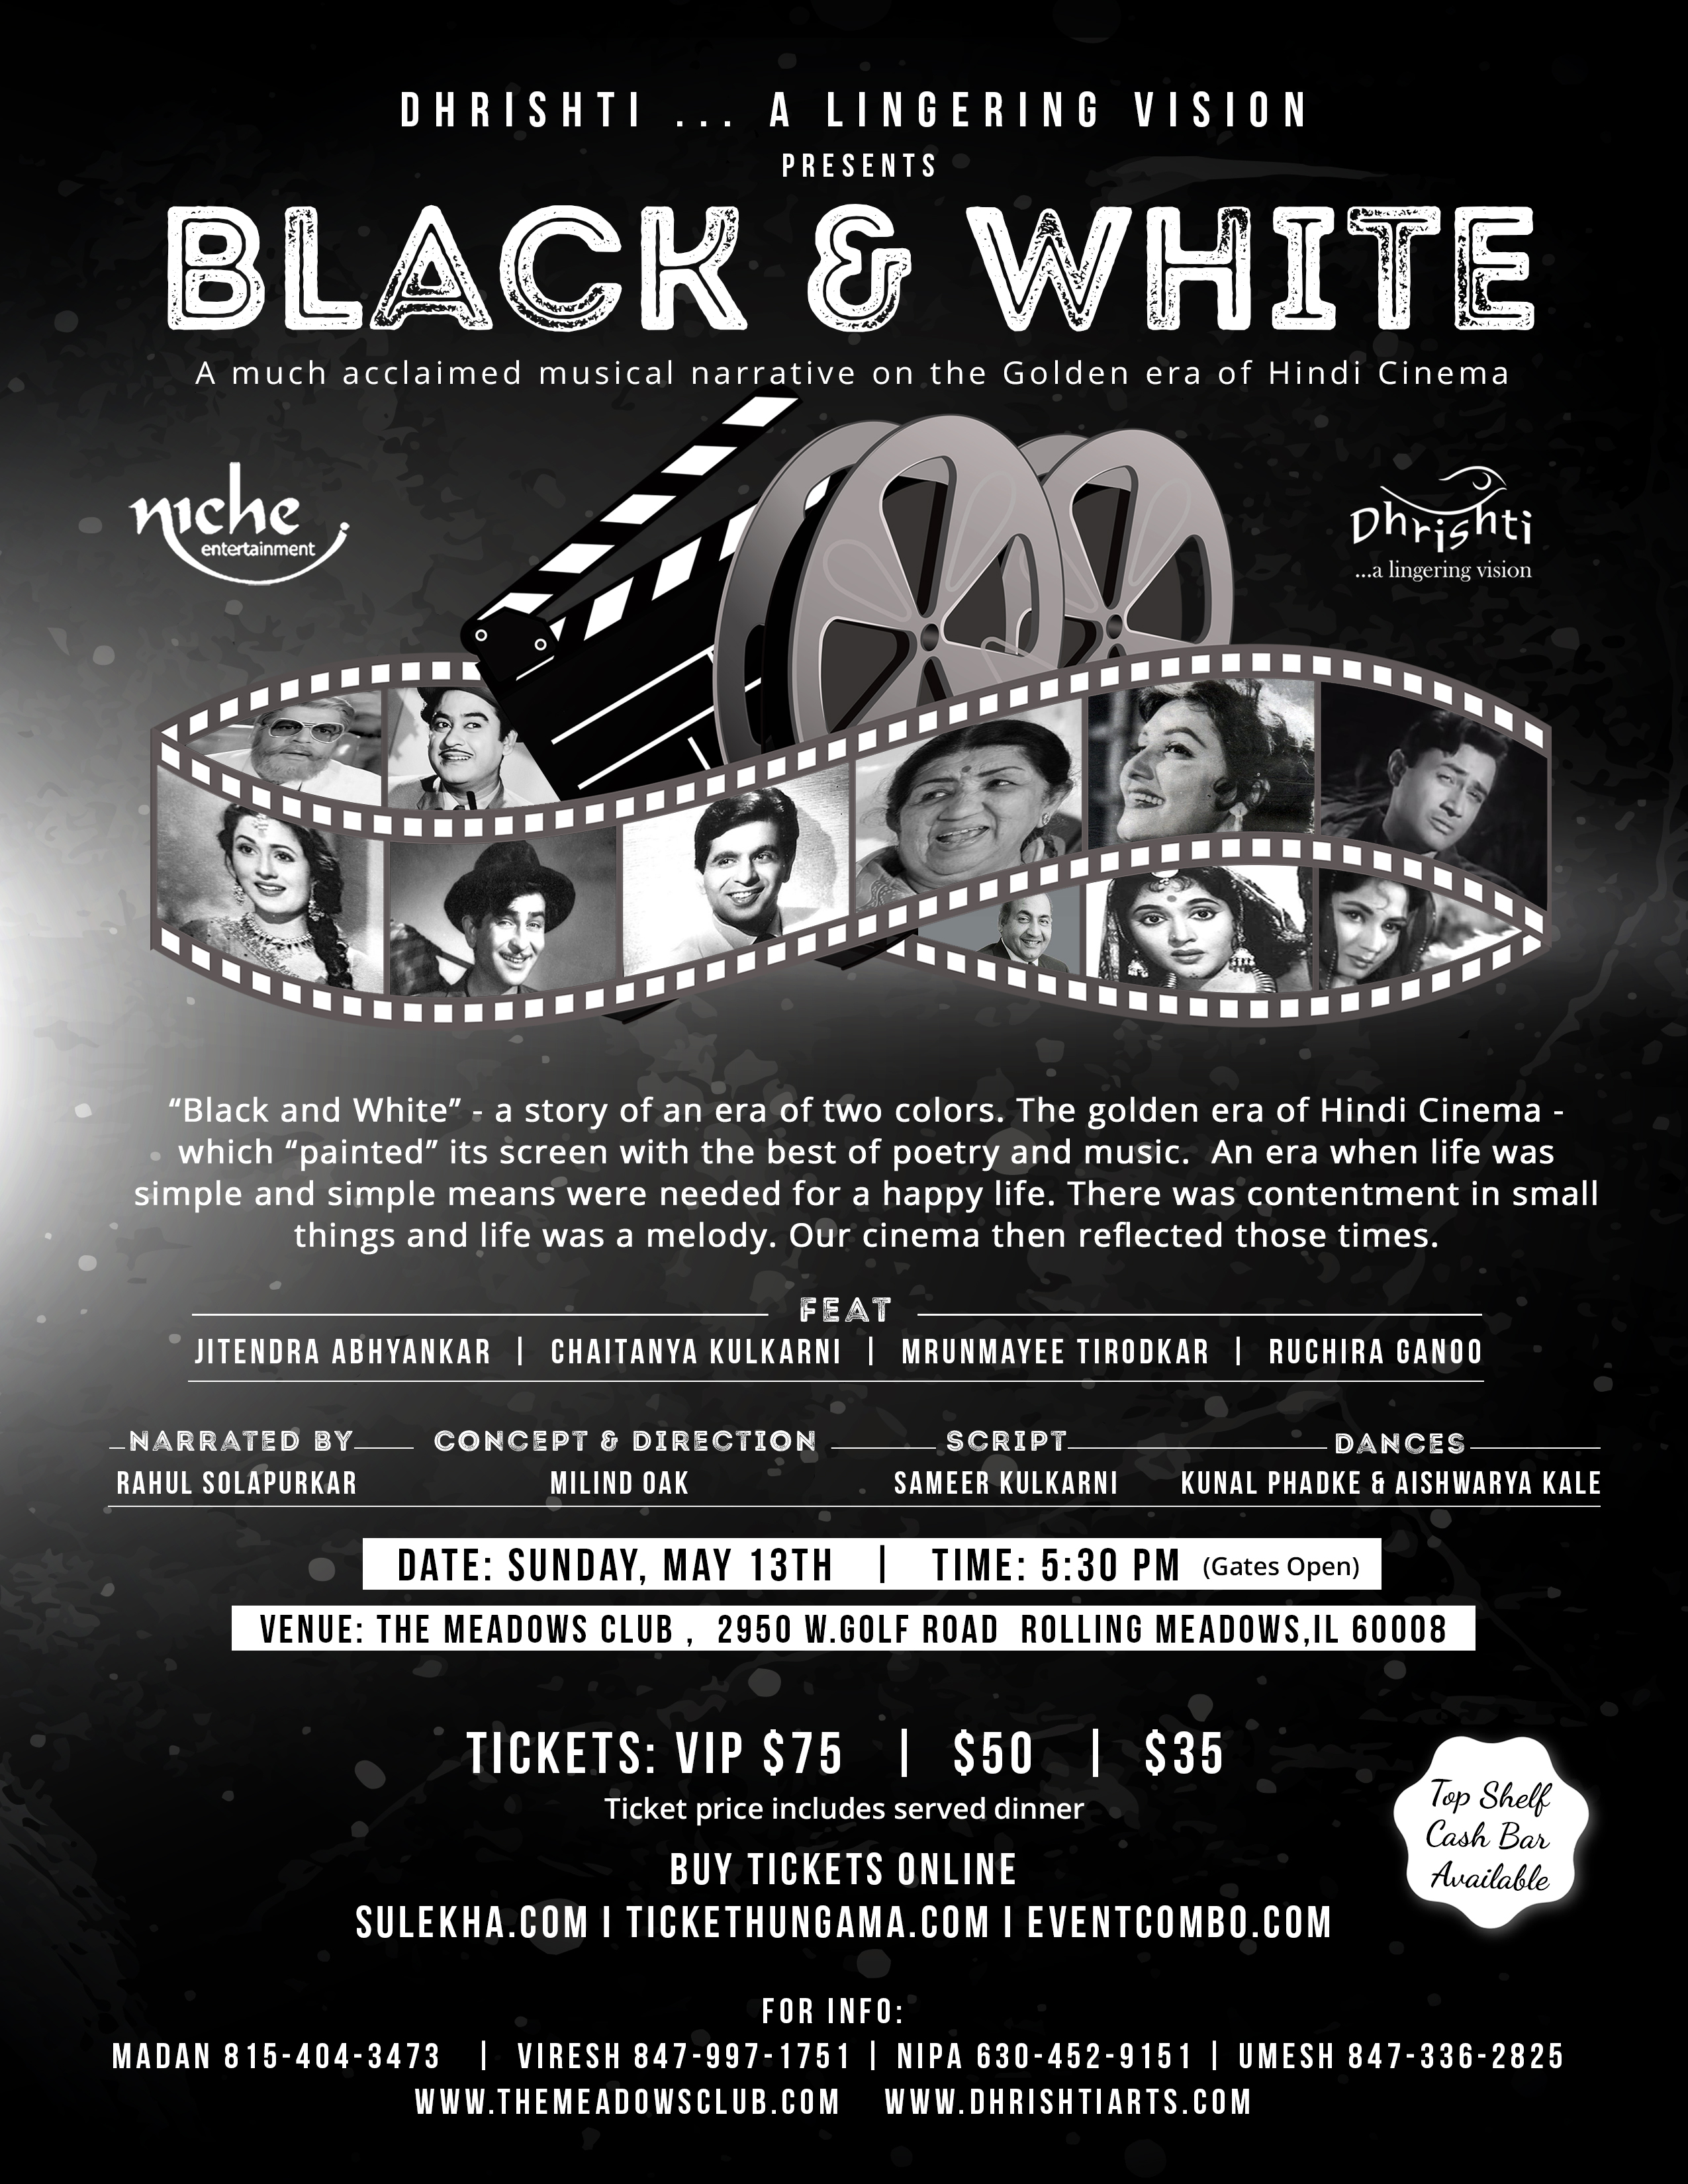 BLACK & WHITE - A much acclaimed musical narrative on the Golden era of Hindi Cinema